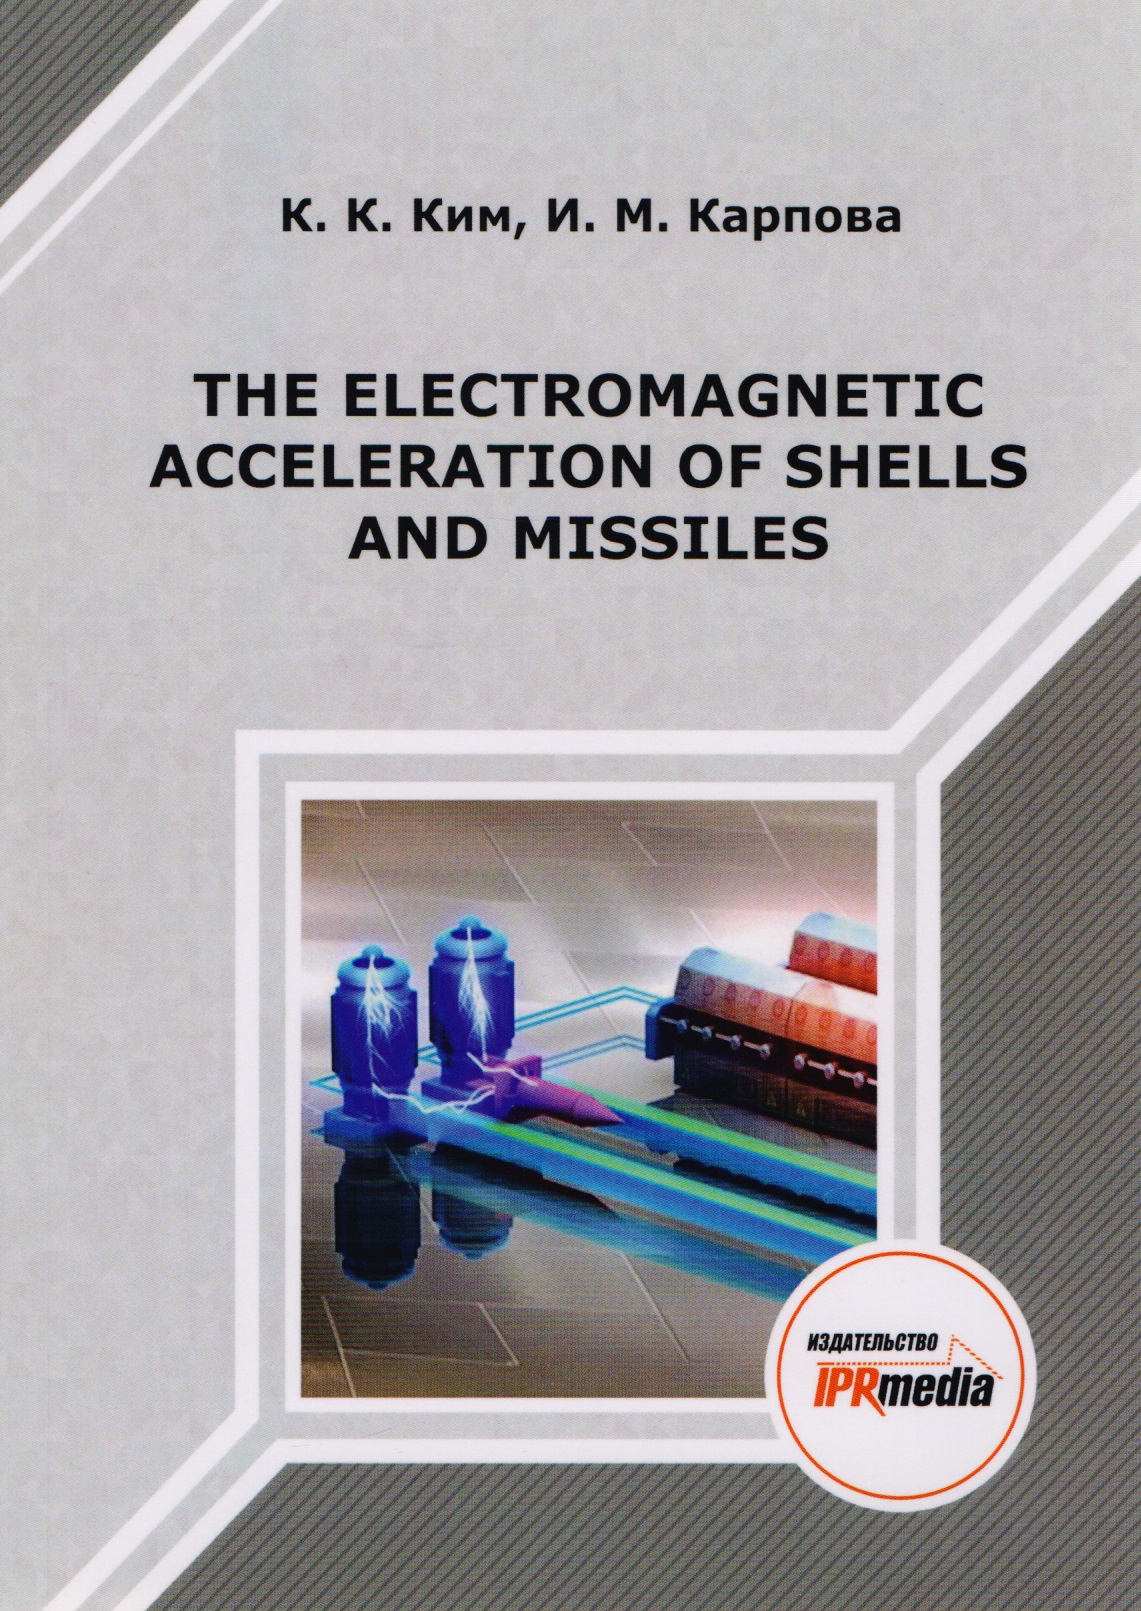 The electromagnetic acceleration of shells and missiles. 